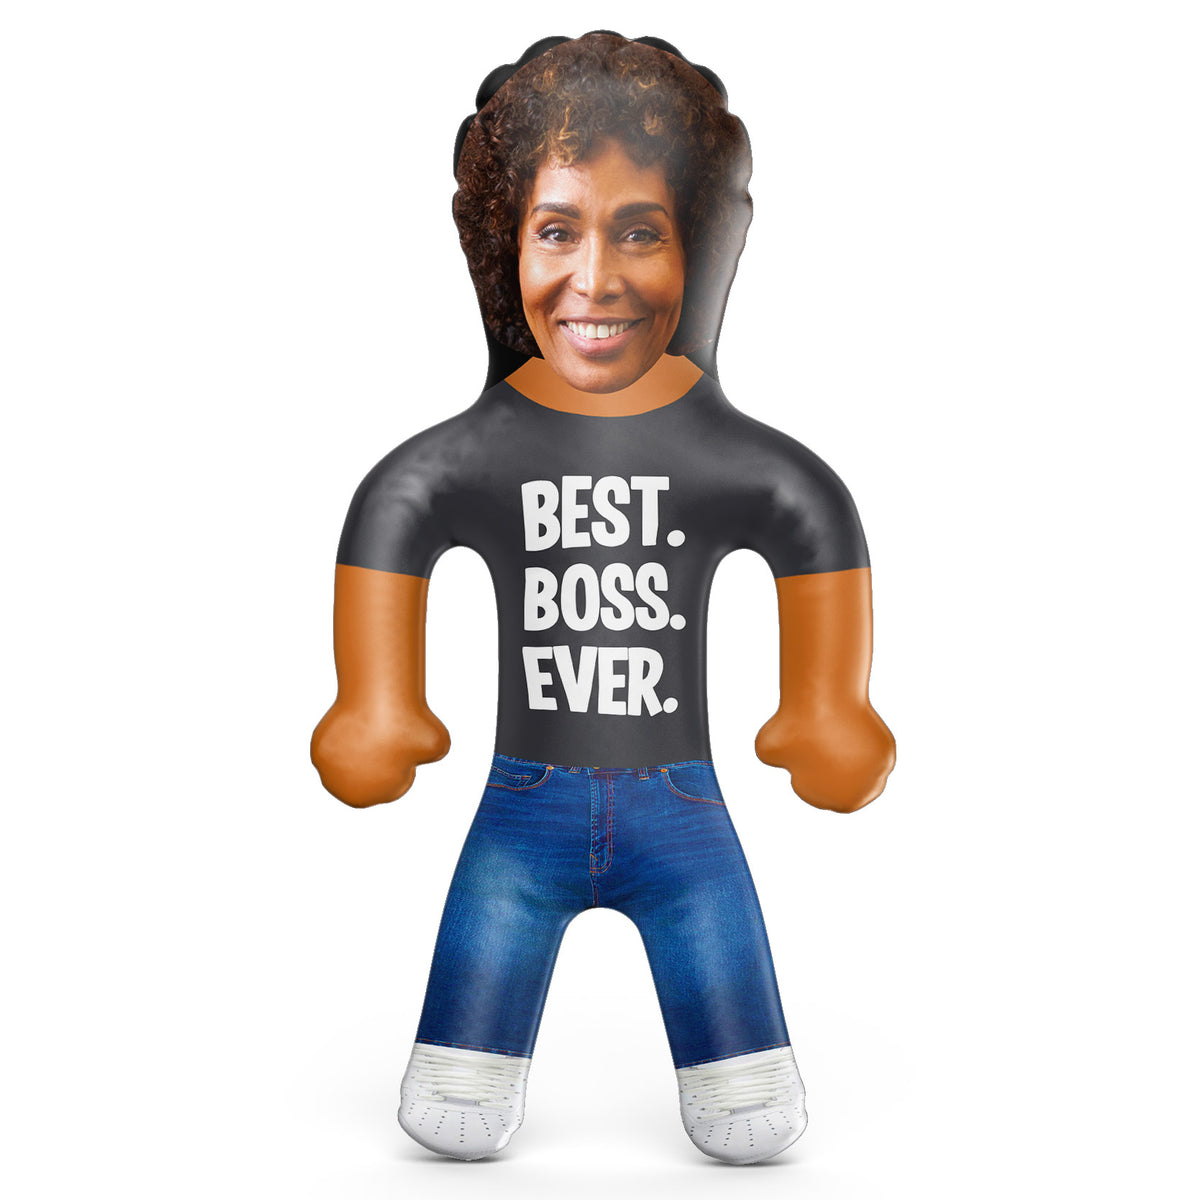 Best Boss Ever Inflatable Doll - Custom Blow Up Doll